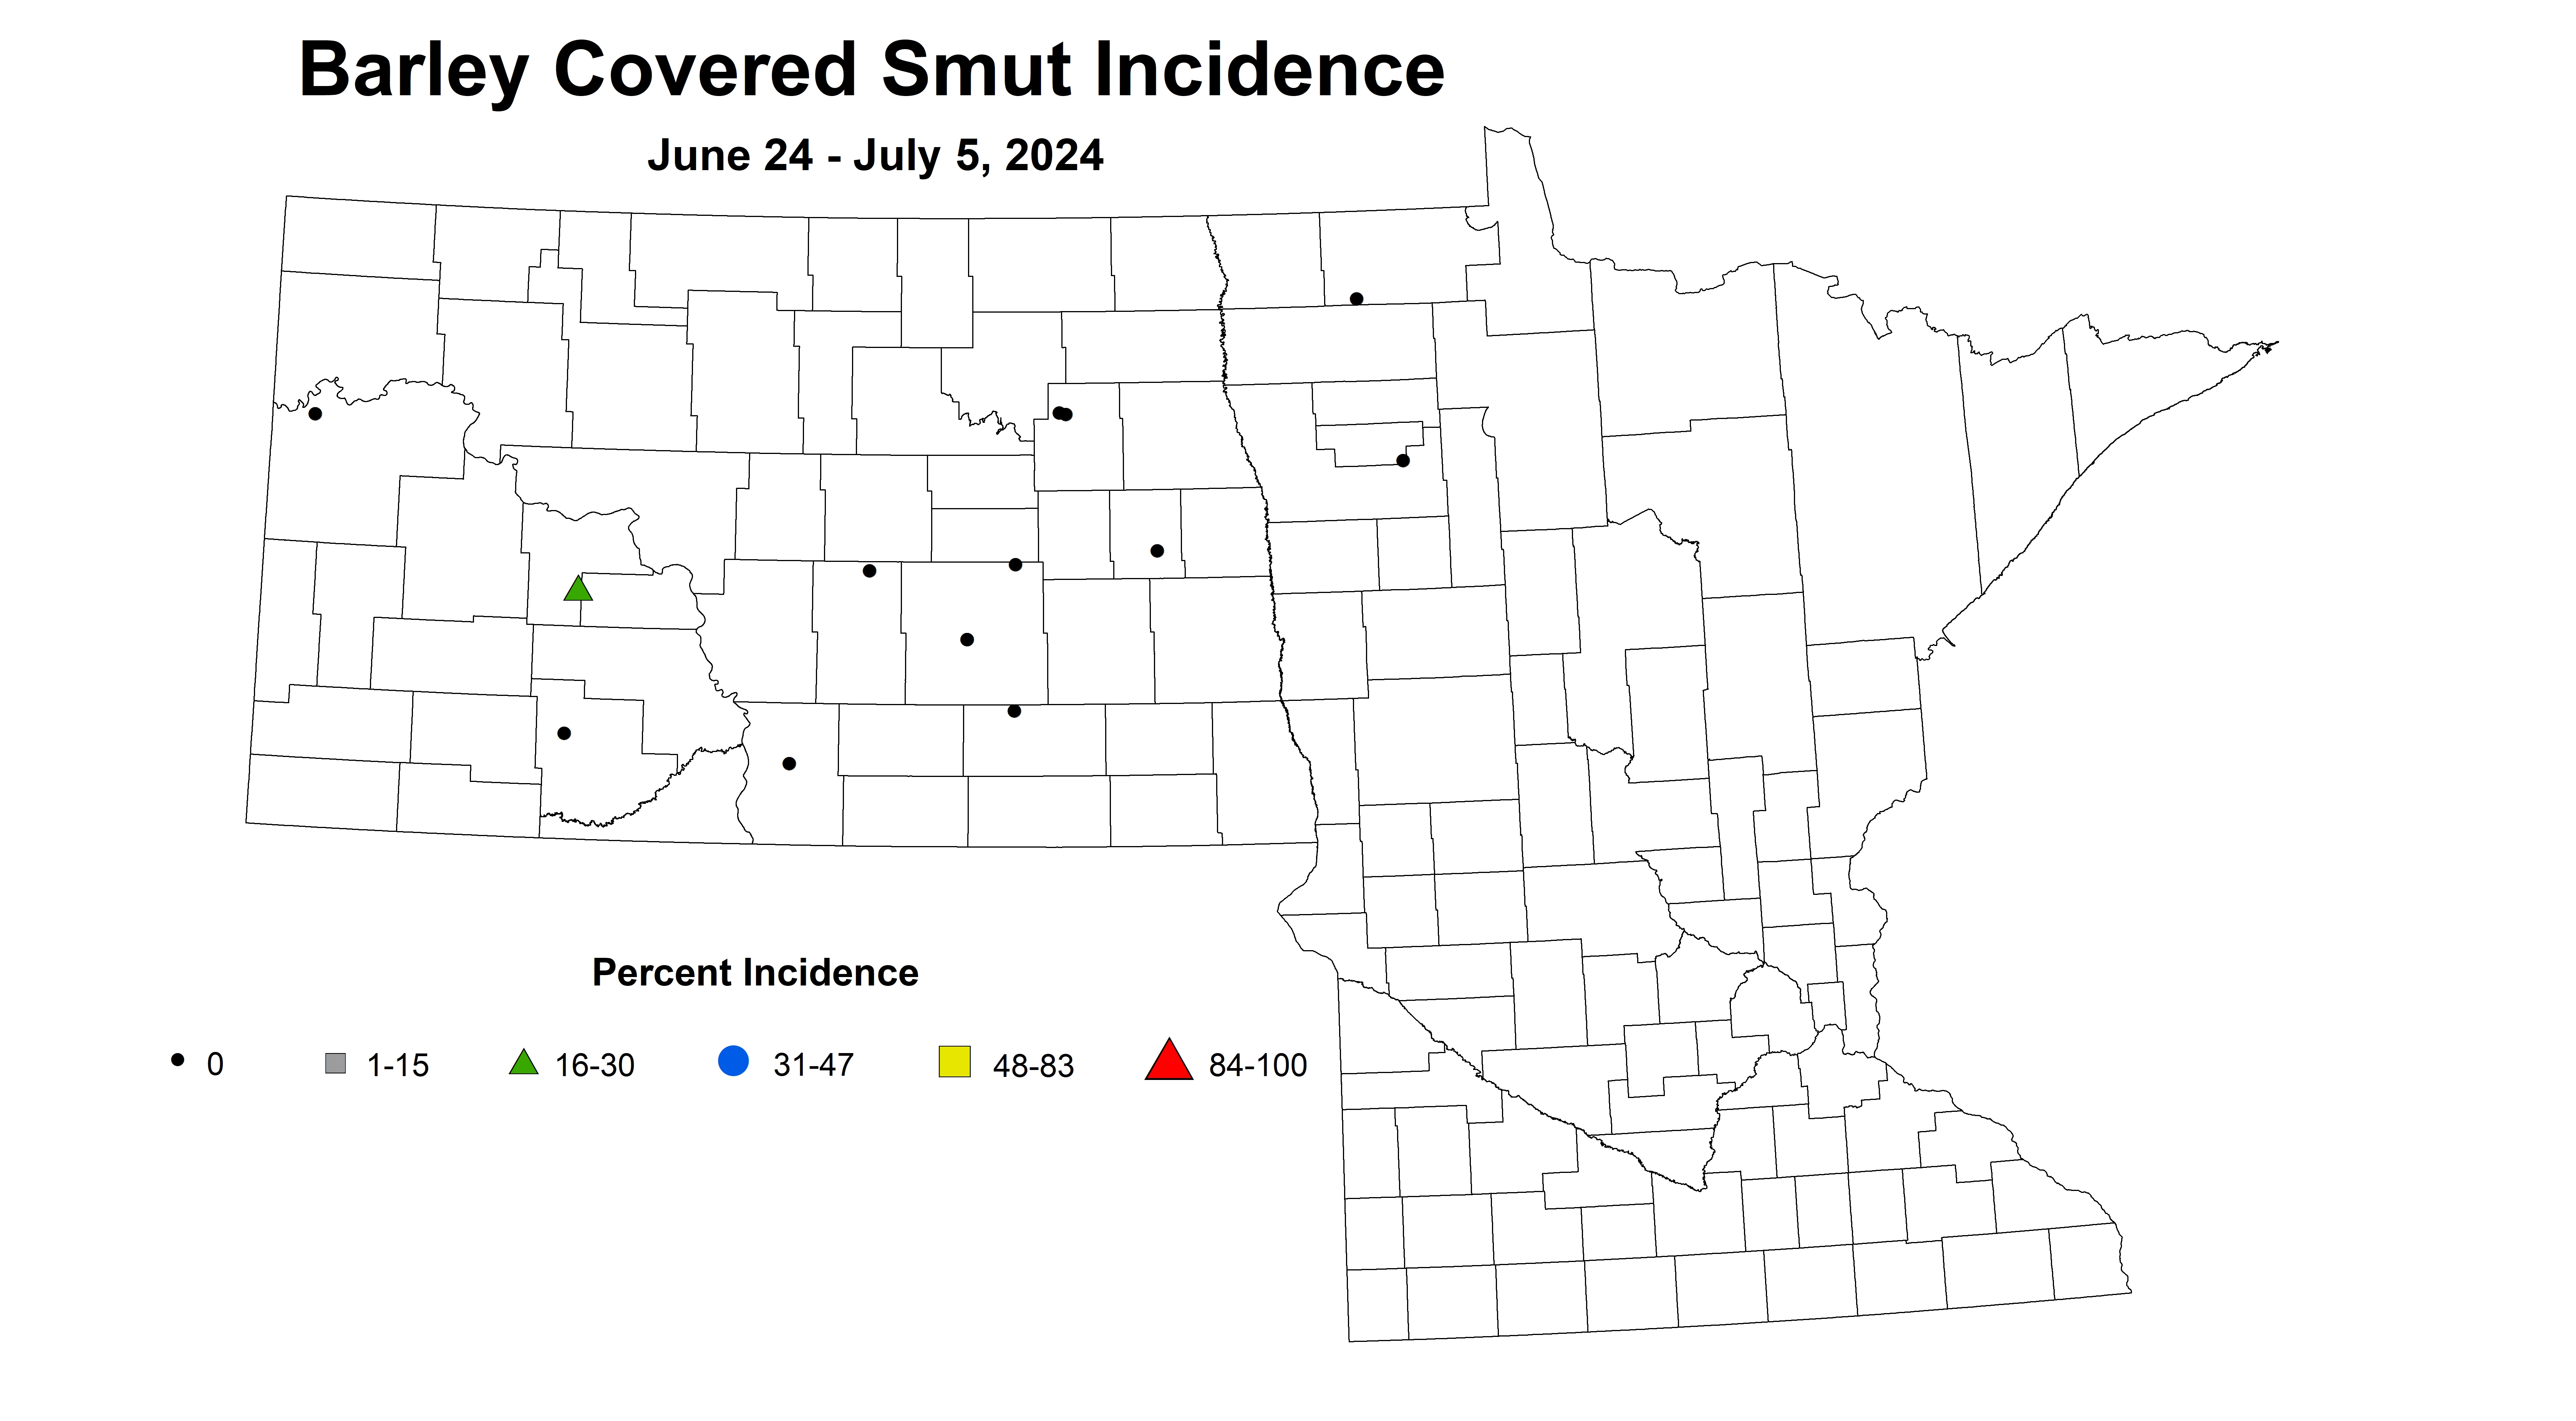 barley covered smut incidence June 24 to July 5 2024